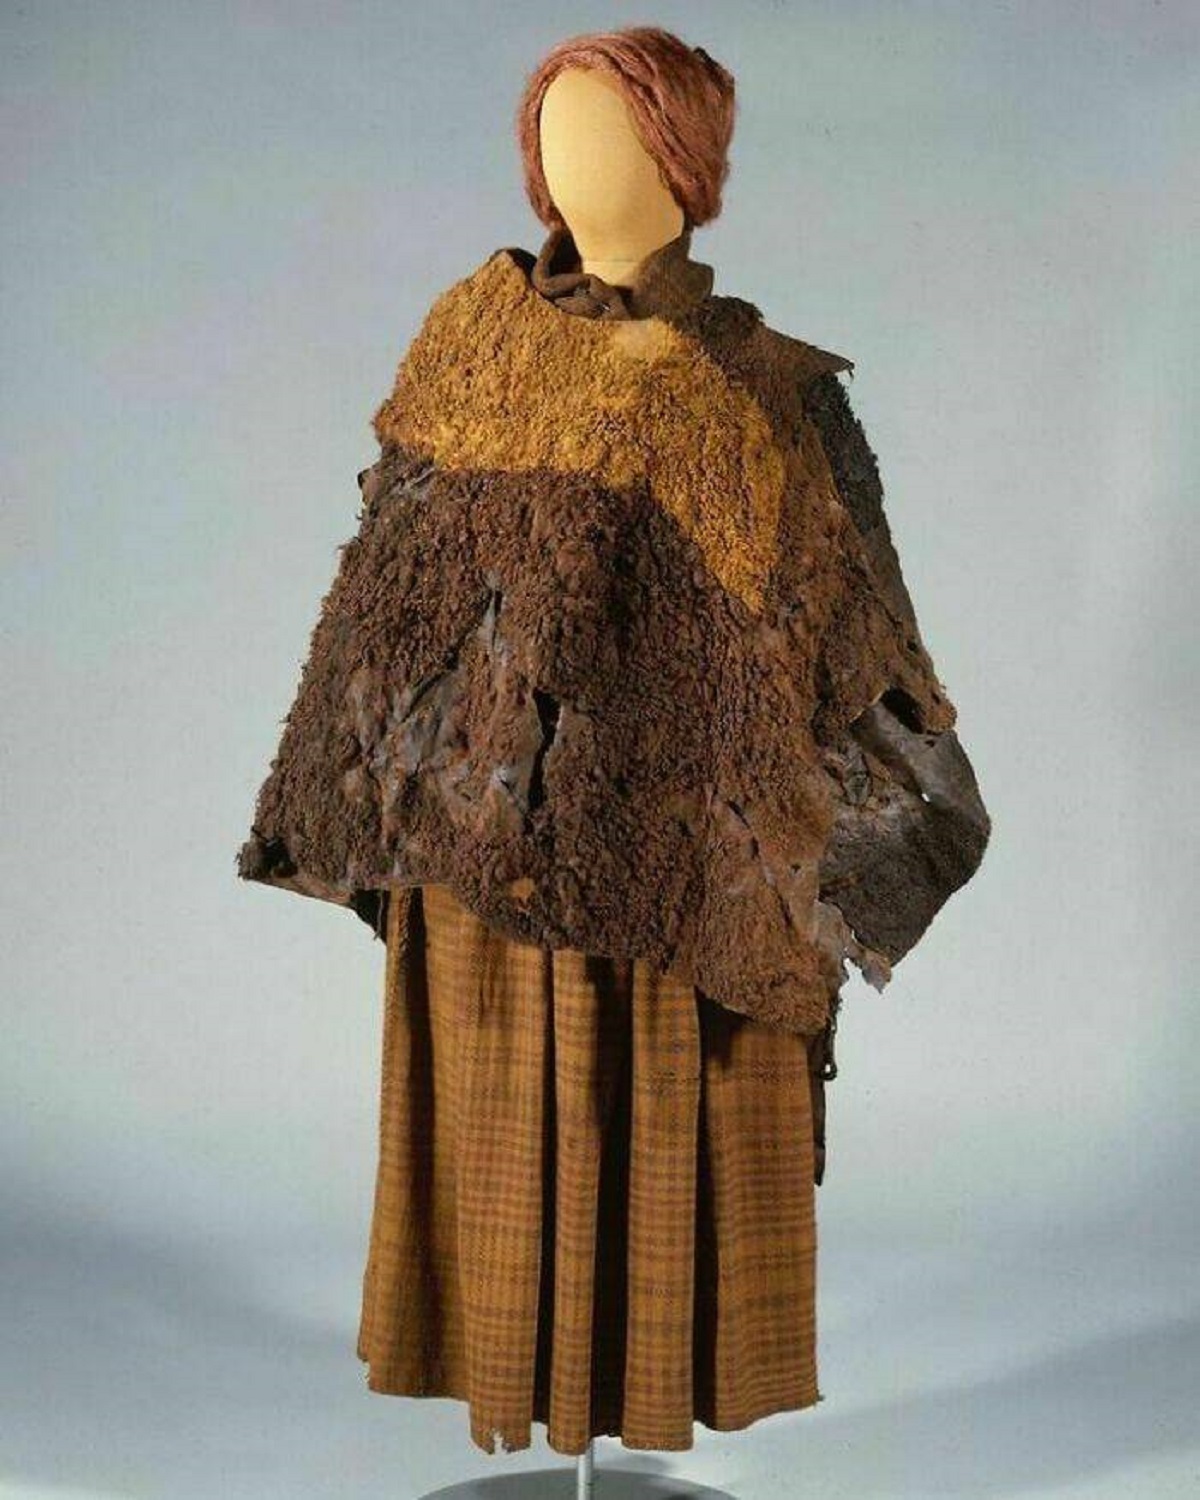 "The 2000-Year-Old Clothes Of The Huldremose Woman, A Bog Body Recovered In 1879 From A Peat Bog Near Ramten In Denmark"